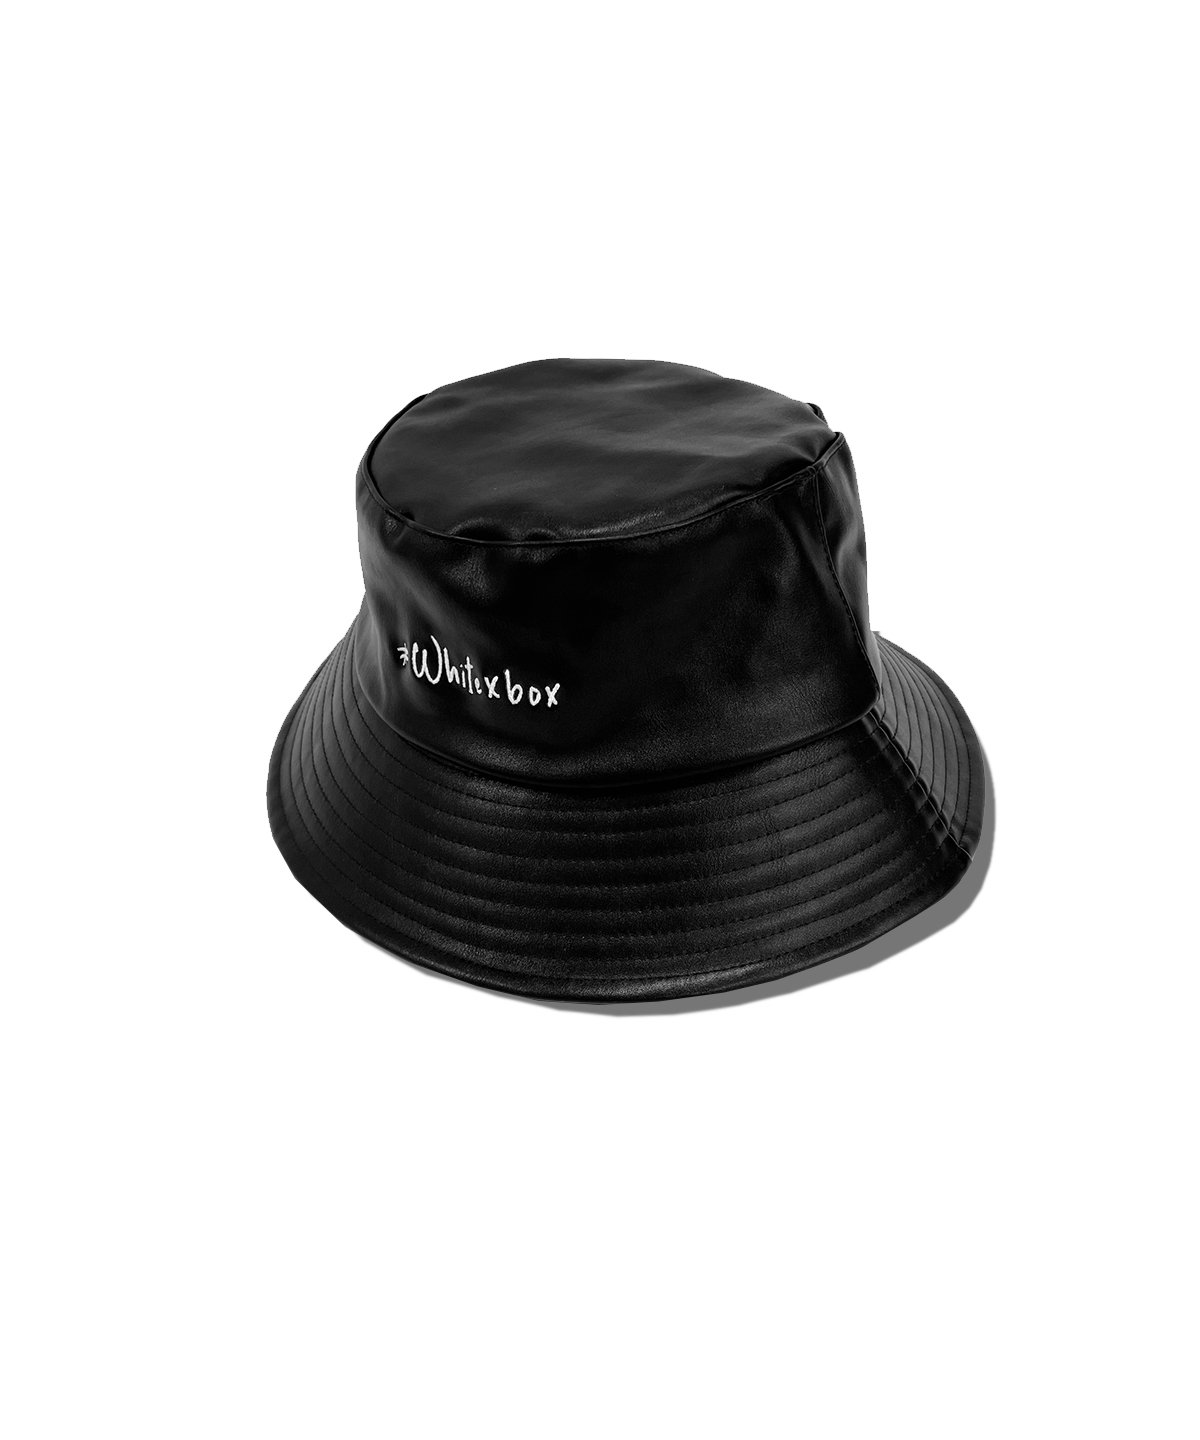 22AW最新作】#white×box LOGO Leather Embroidery Bucket Hat.WHT